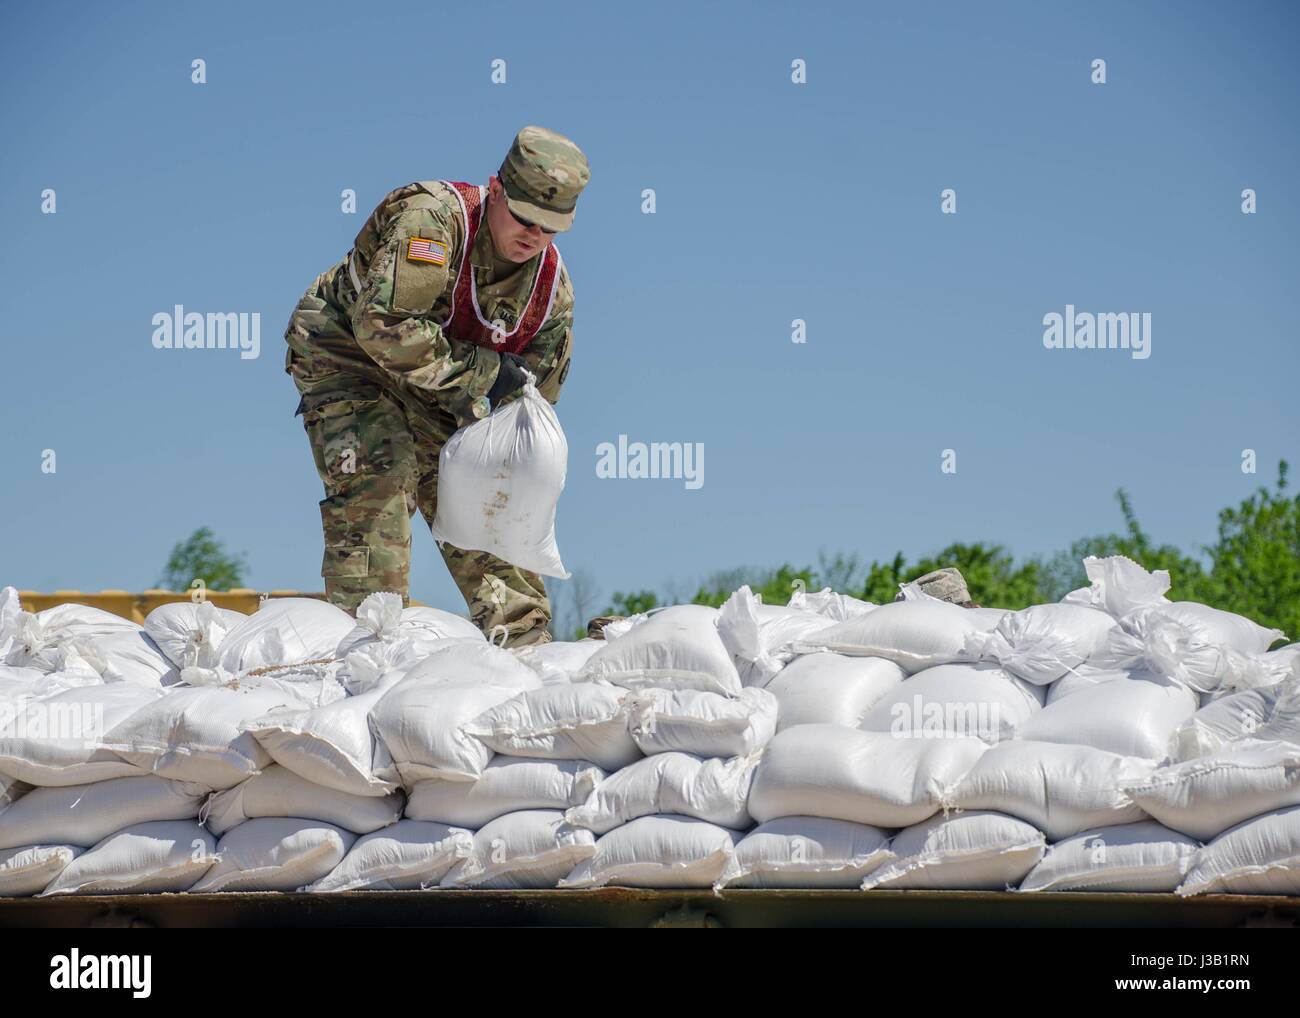 Missouri National Guardsmen work to build a support wall with sandbags to support a levee against floodwaters May 2, 2017 in Poplar Bluff, Missouri. Historic flooding has swamped towns across Arkansas and Missouri with at least 20 people reported dead. Stock Photo